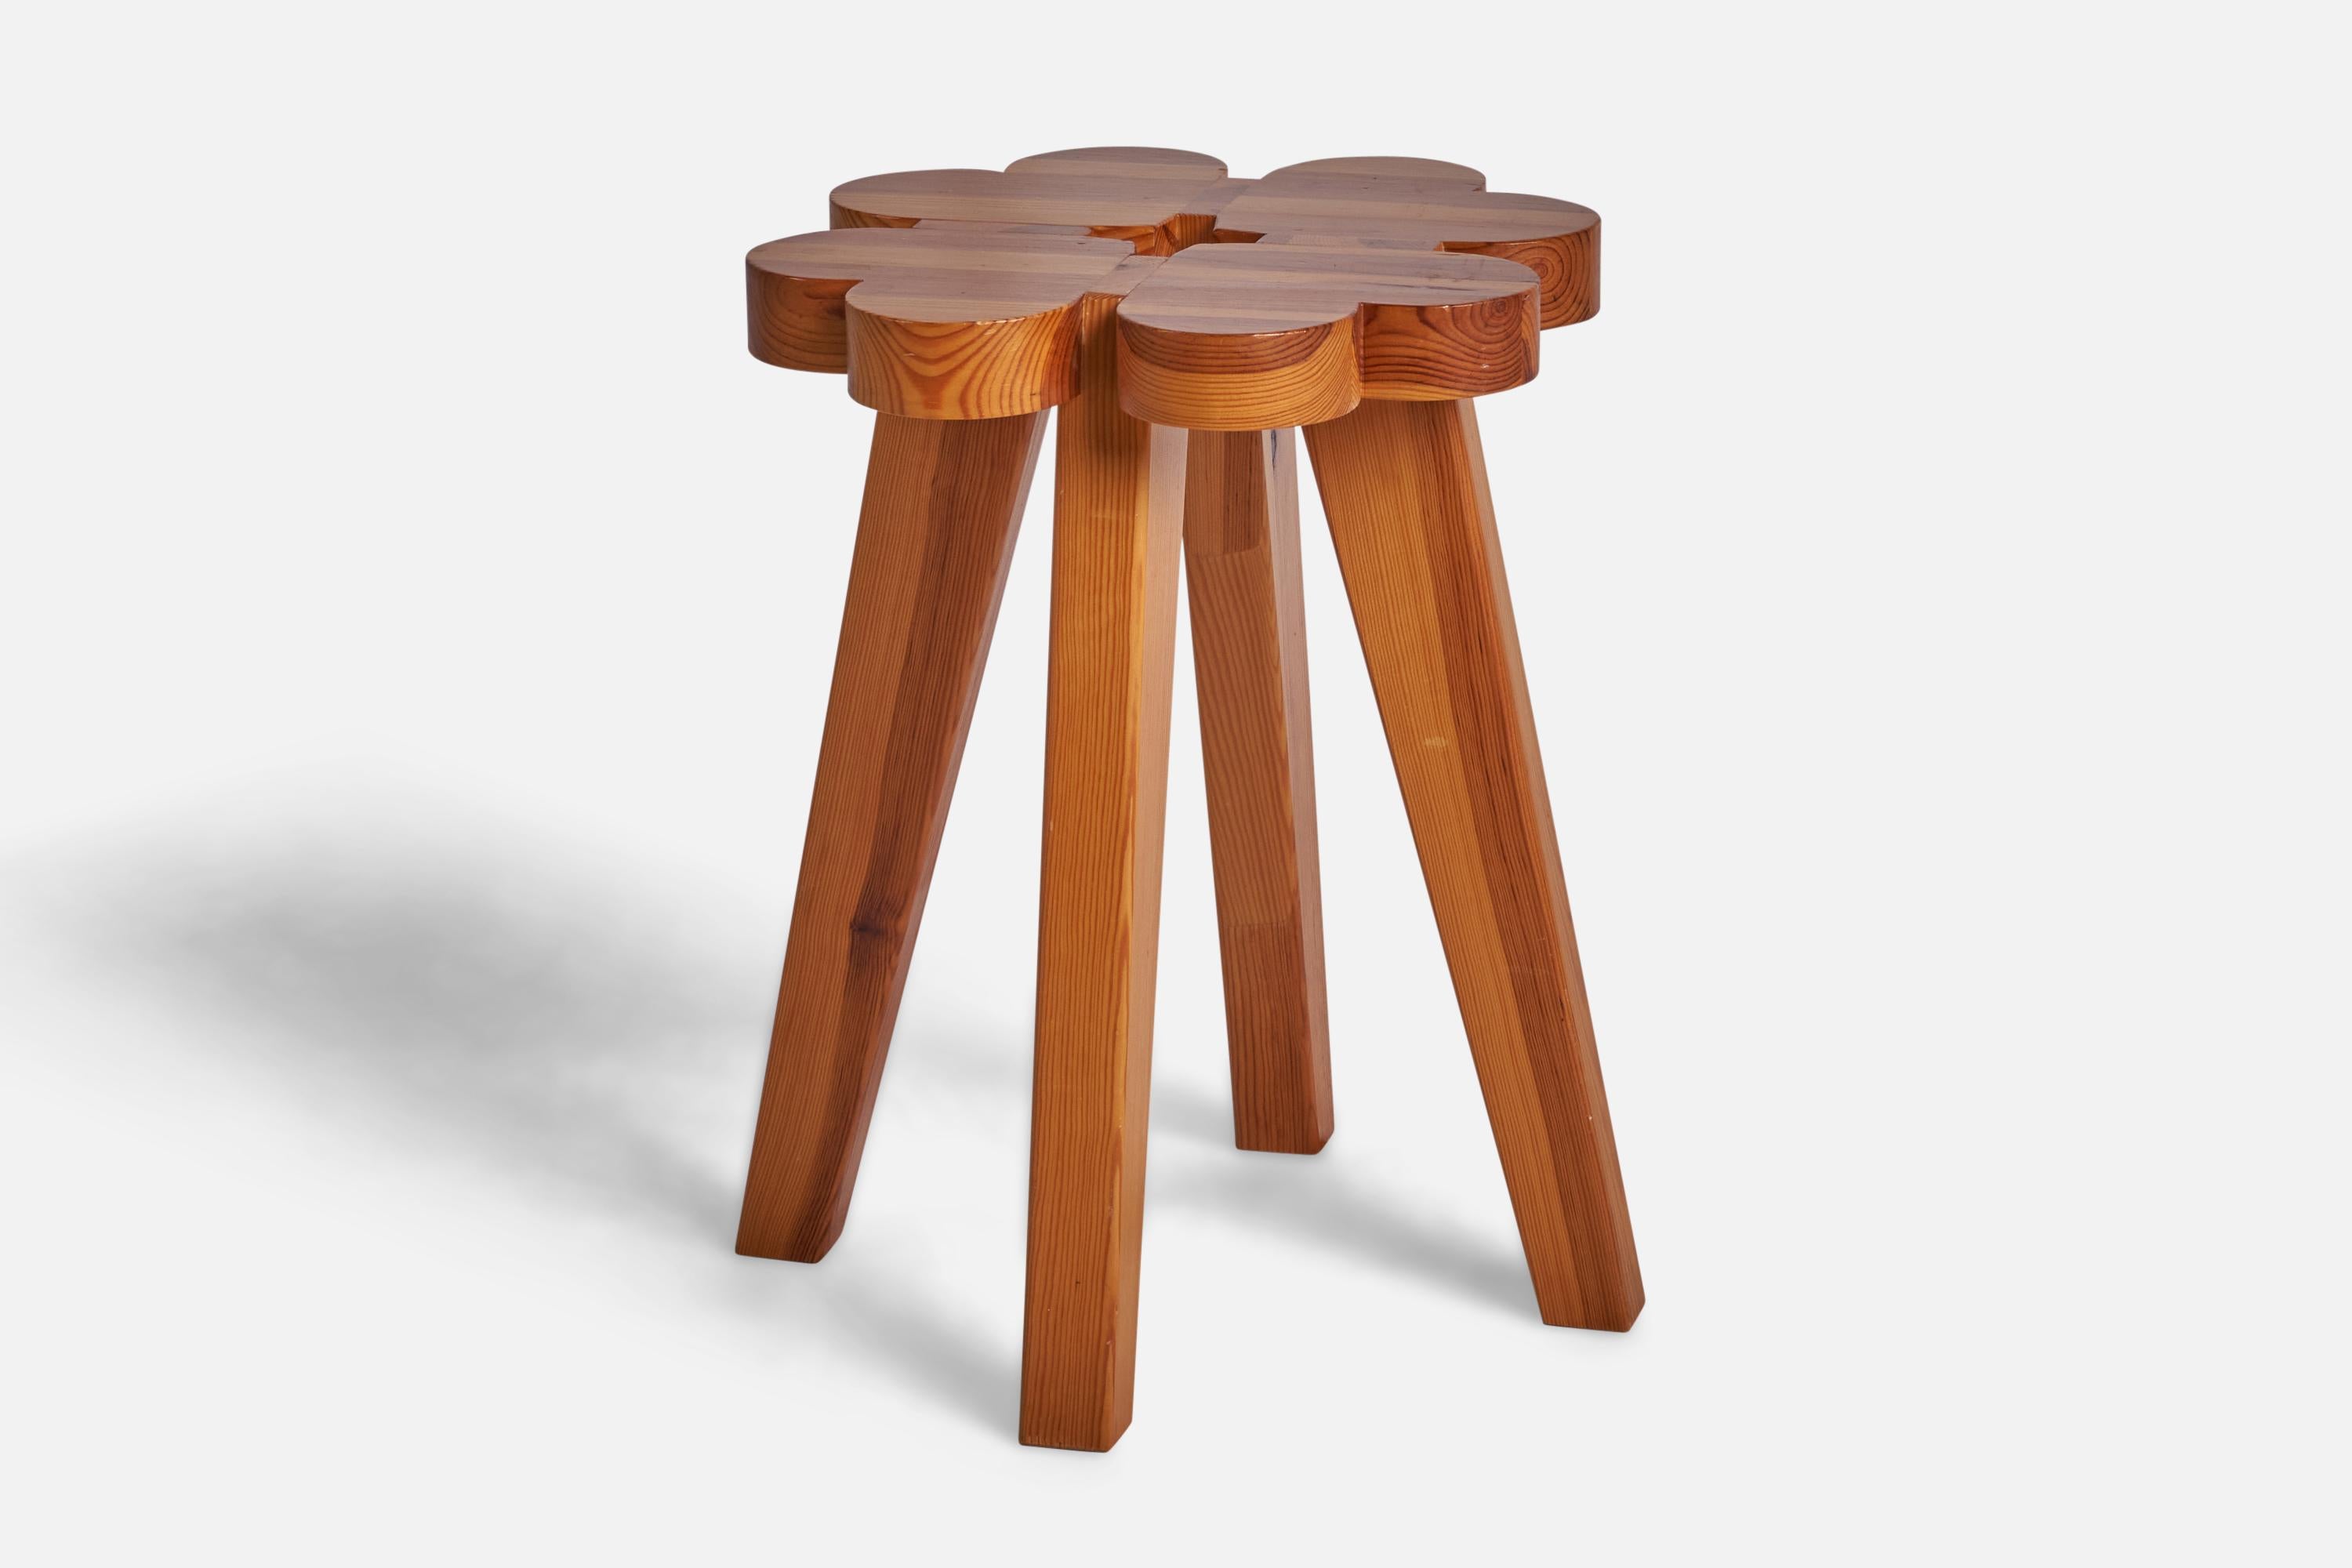 A pine stool designed and produced in Sweden, 1998.